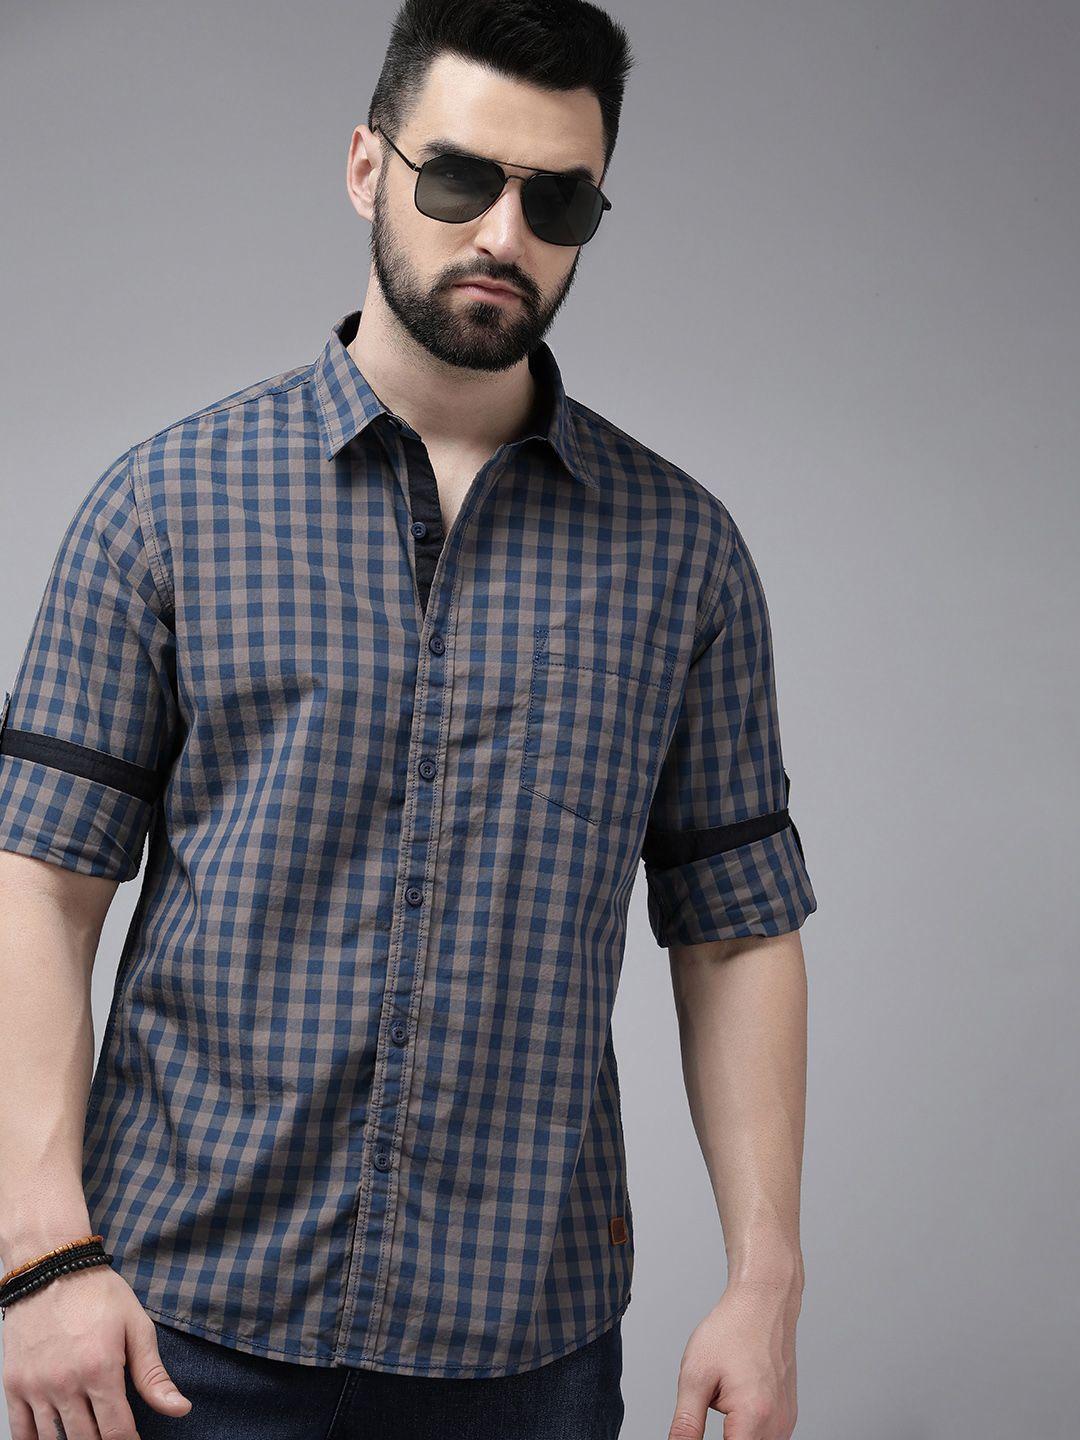 The Roadster Lifestyle Co. Pure Cotton Gingham Checked Casual Shirt